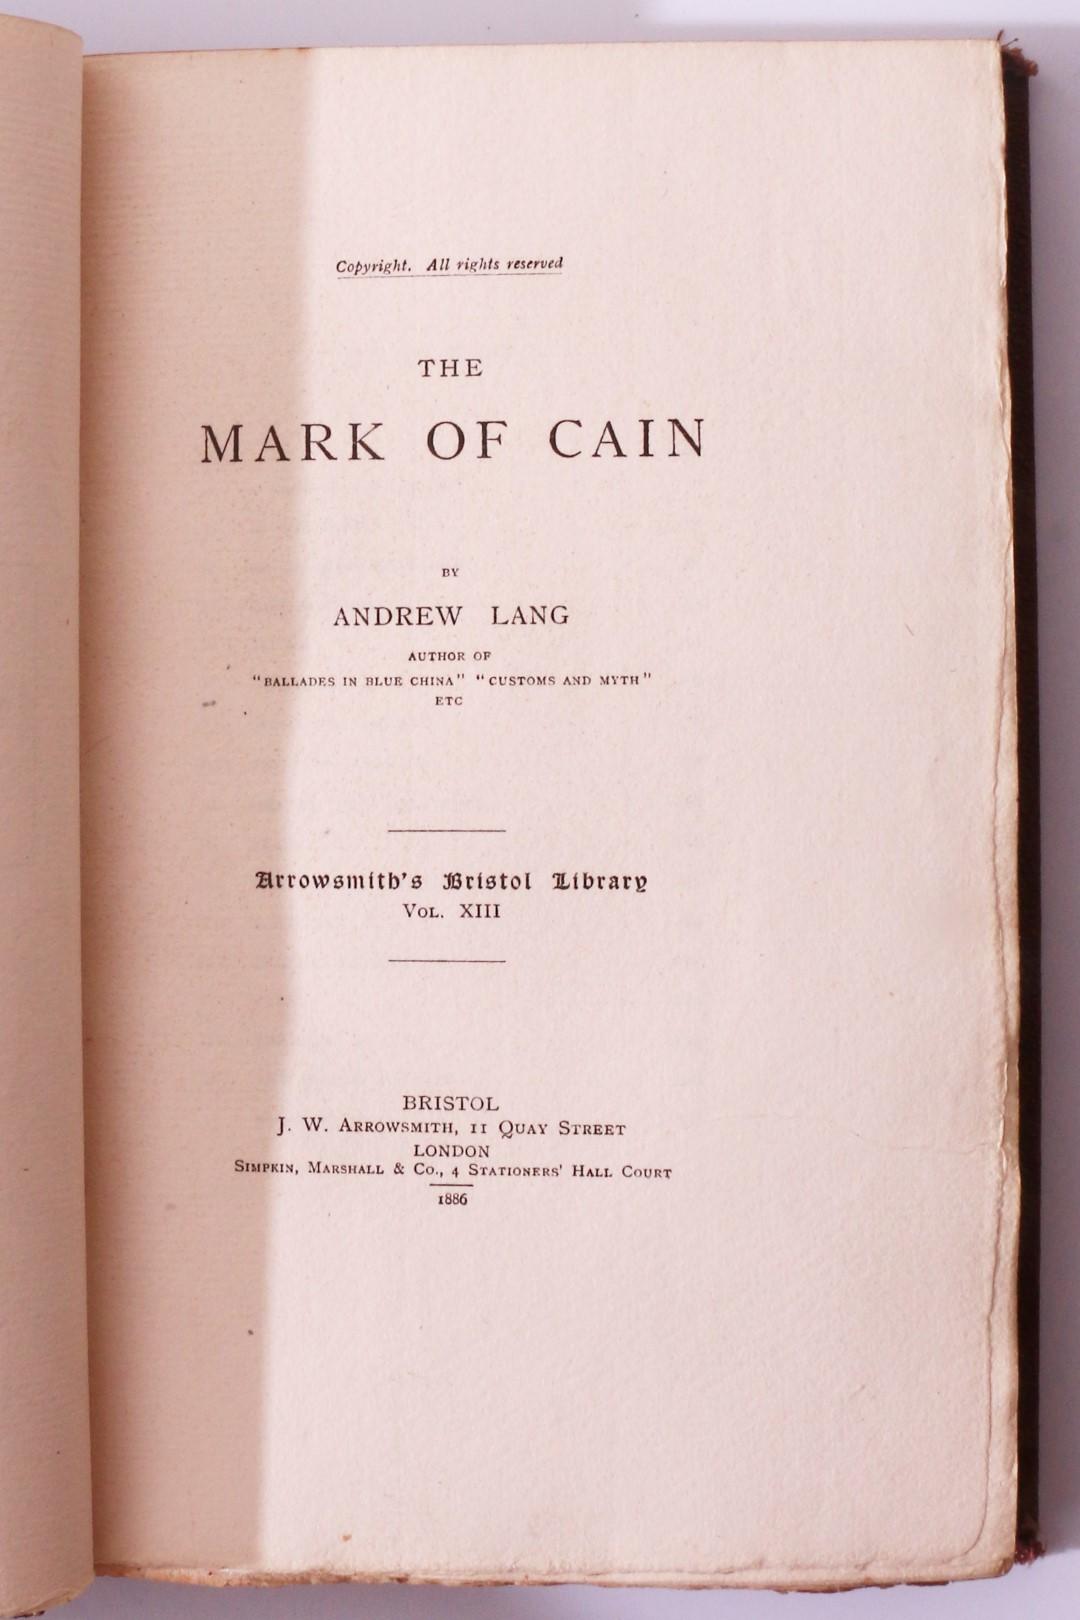 Andrew Lang - The Mark of Cain - J.W. Arrowsmith, 1886, First Edition.